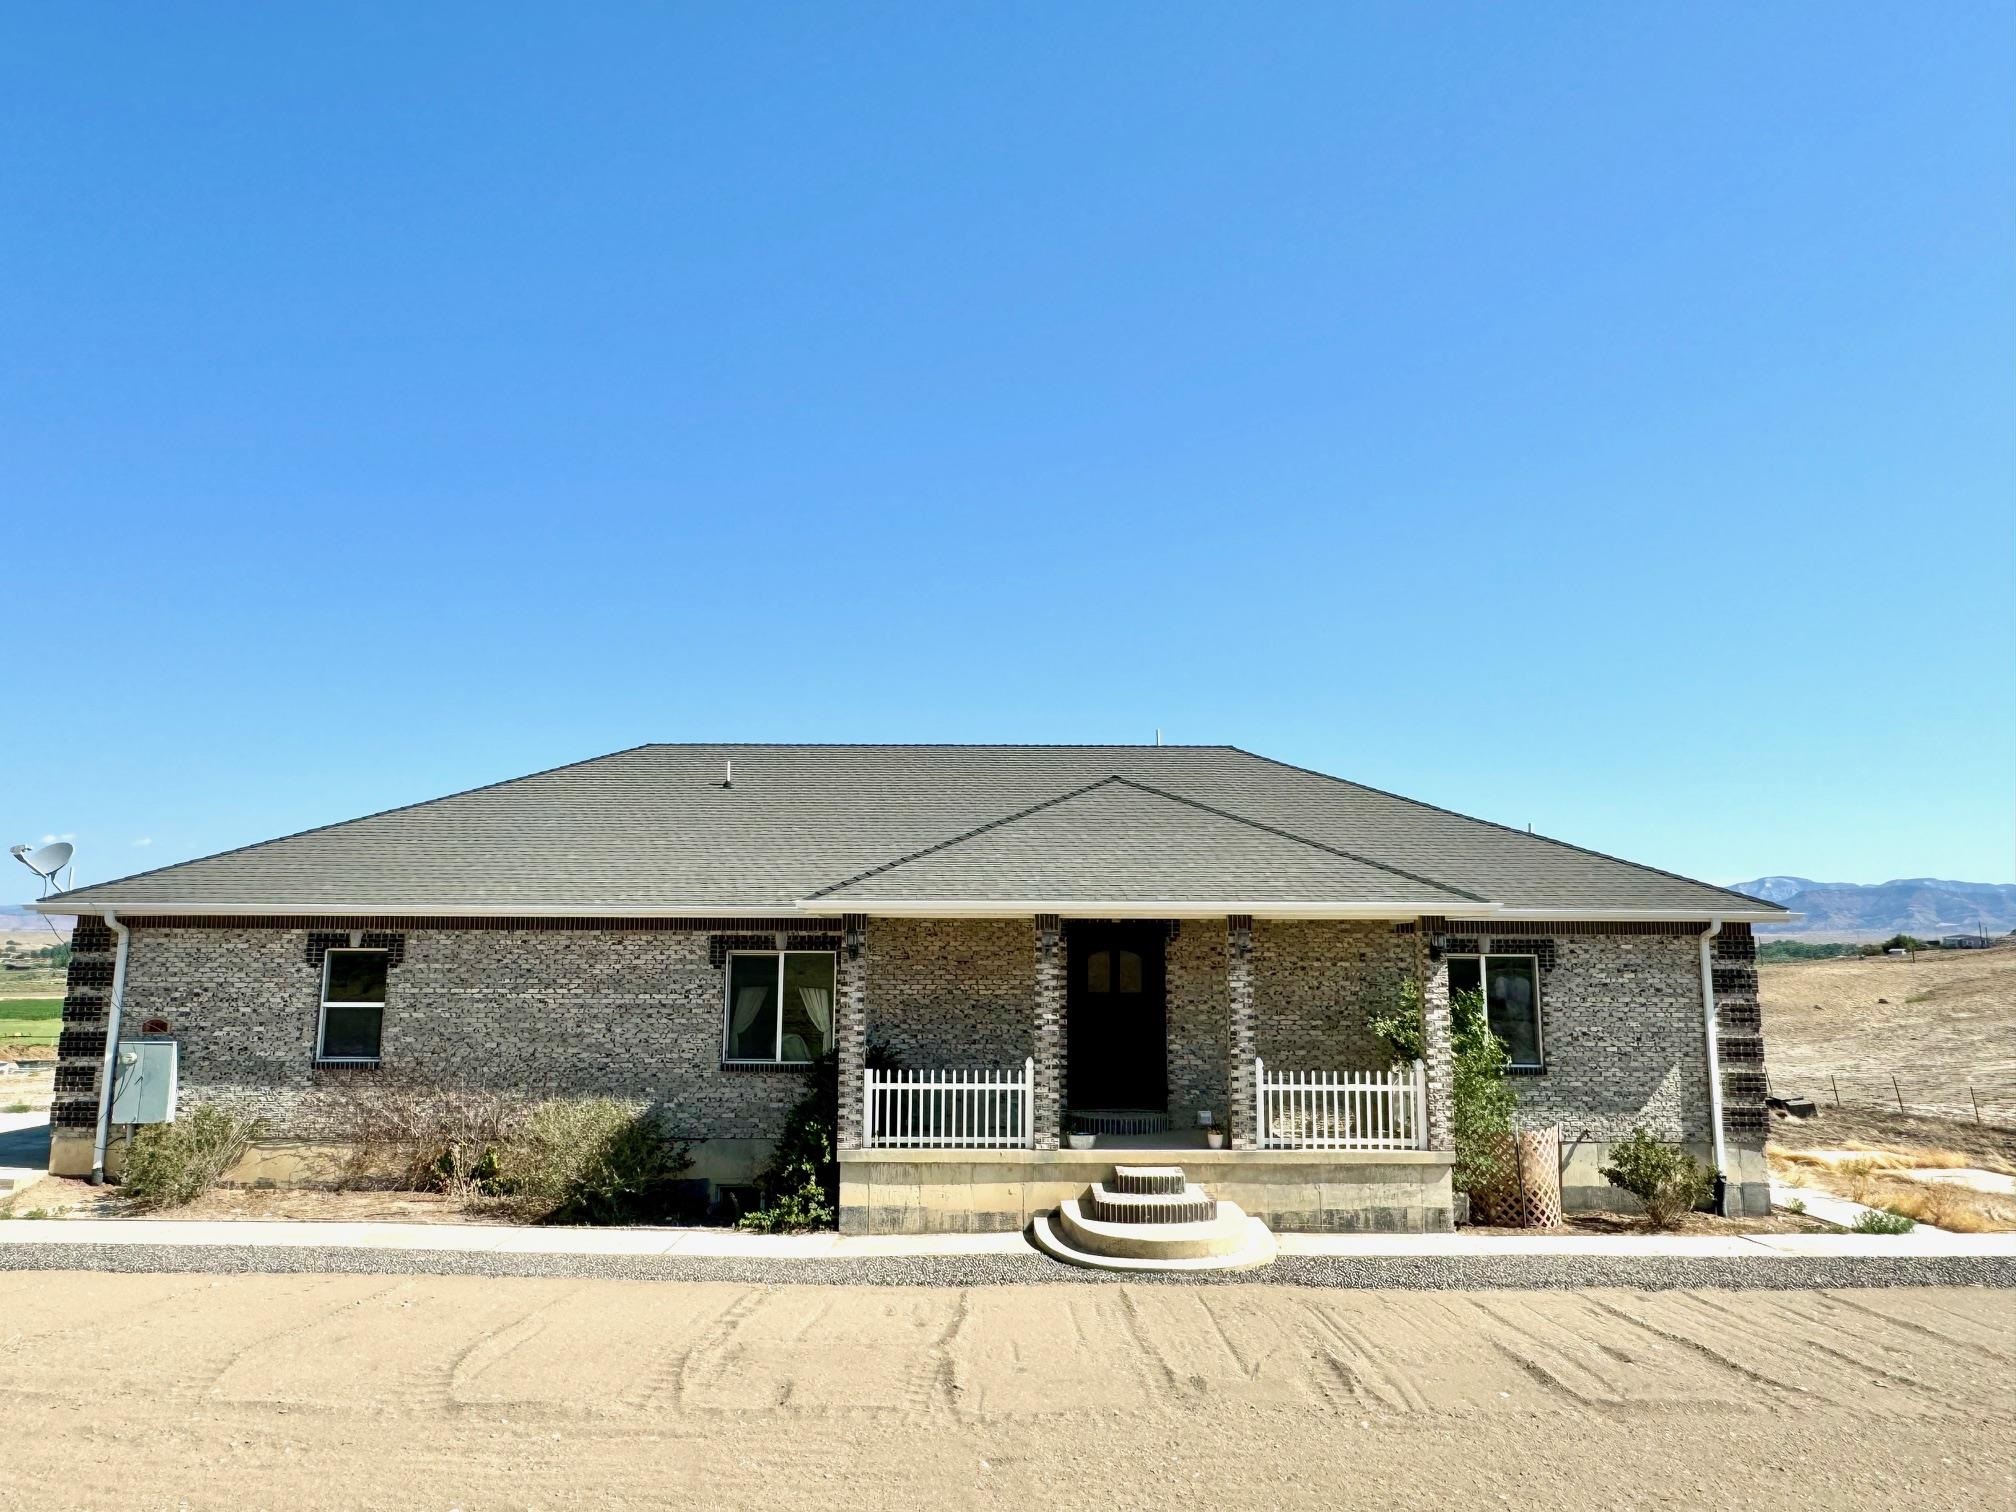 Come visit the only house with over 5 acres and 4000 sq.ft listed for under $900,000 in the Fruita/Loma area! This delightful 4100 sq.ft. ranch-style home with a walk-out basement, sits on over 5 acres of land, offering equestrian potential and space. Recently renovated, the main floor has an updated kitchen with the convenience of a concealed pantry and new fixtures and flooring in most areas. The lower level has a stunning master suite complete with a spacious bath featuring a luxurious walk-in shower, soaking tub, and an extremely large closet. The lower level also includes its own laundry room and an additional living space and kitchen, presenting an opportunity for supplementary income. This charming residence has two master suits, 5 bedrooms total with 5 bathrooms, dual laundry facilities, a walk-in safe, instant hot water in the kitchen and more. This home also includes a oversized 3 car heated garage.  Embrace the vast potential of this acreage and beautiful home.